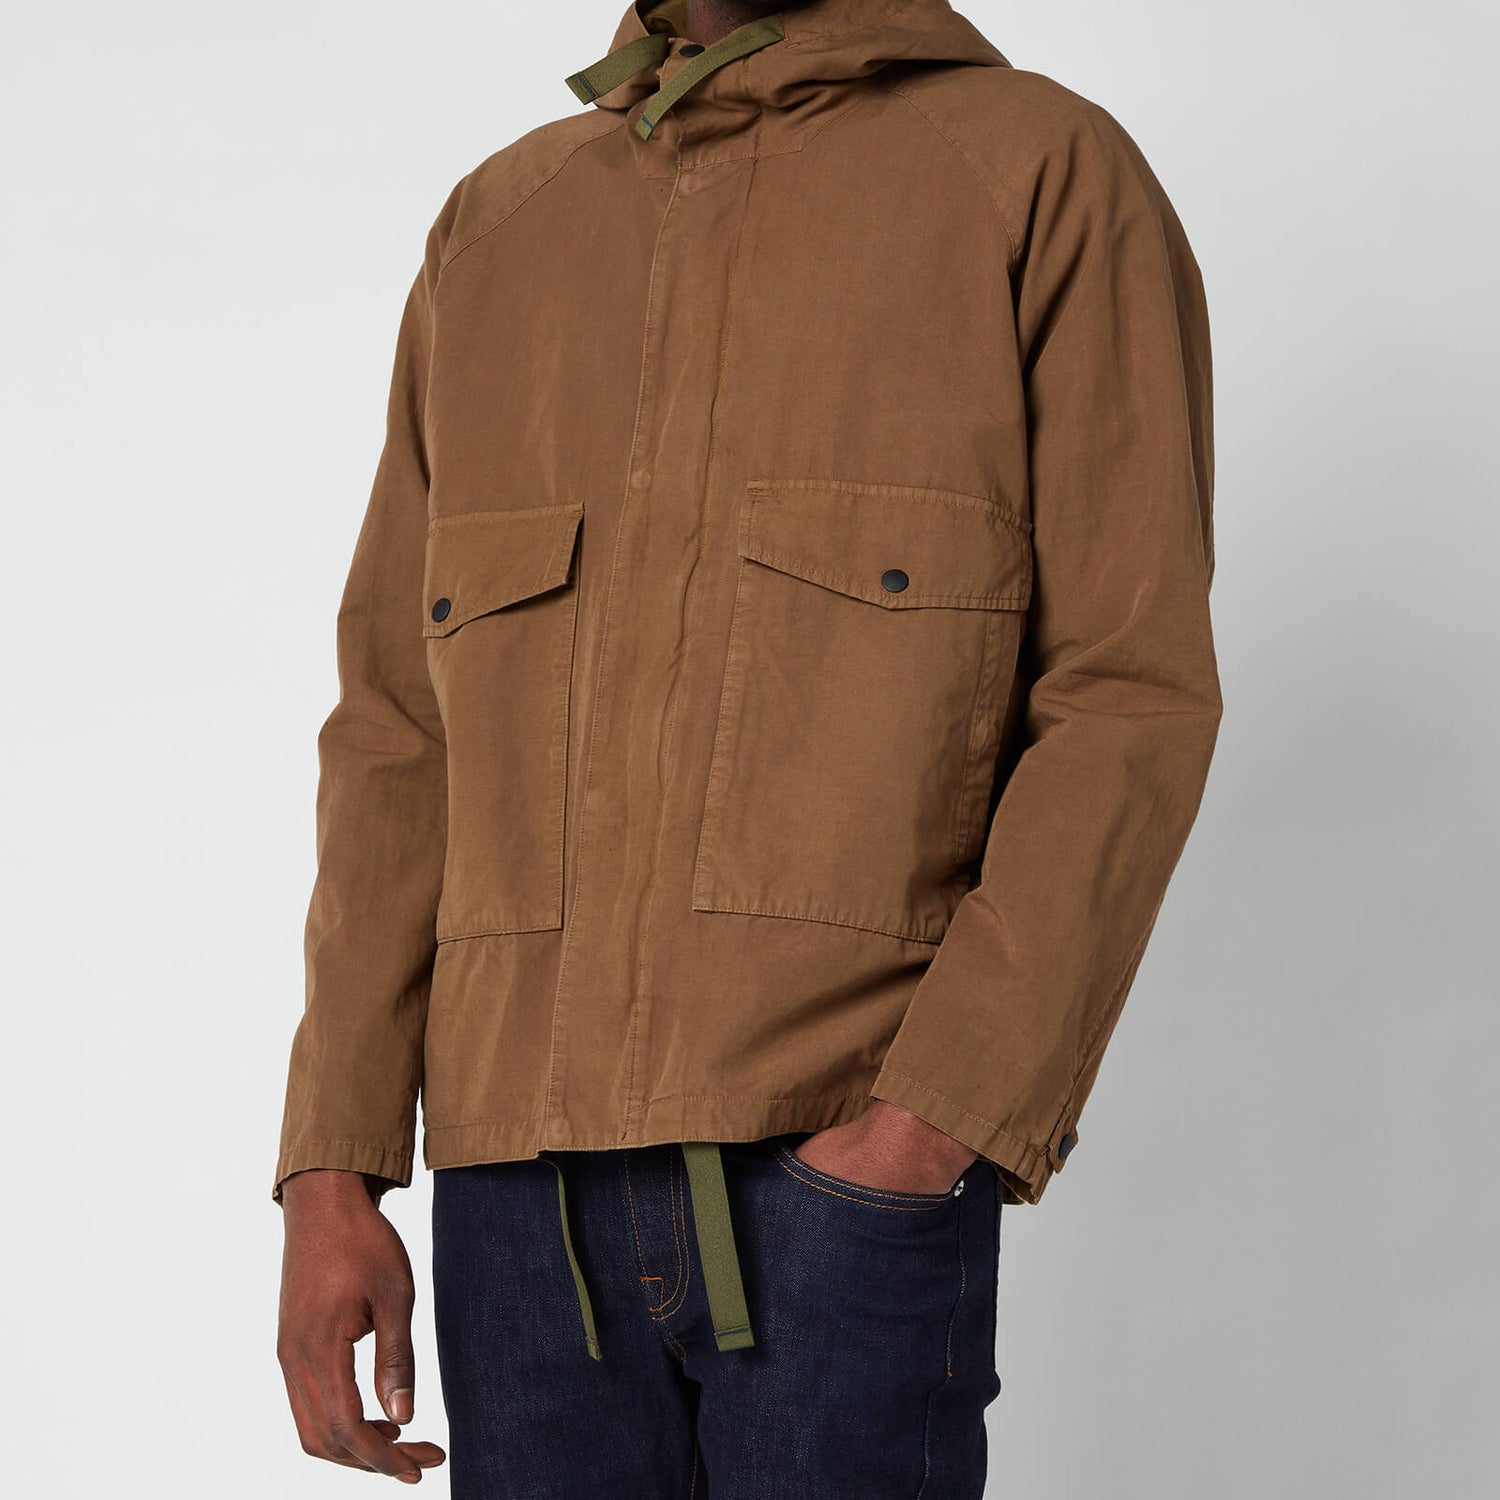 PS Paul Smith Men's Hooded Jacket - Tan - Free UK Delivery Available